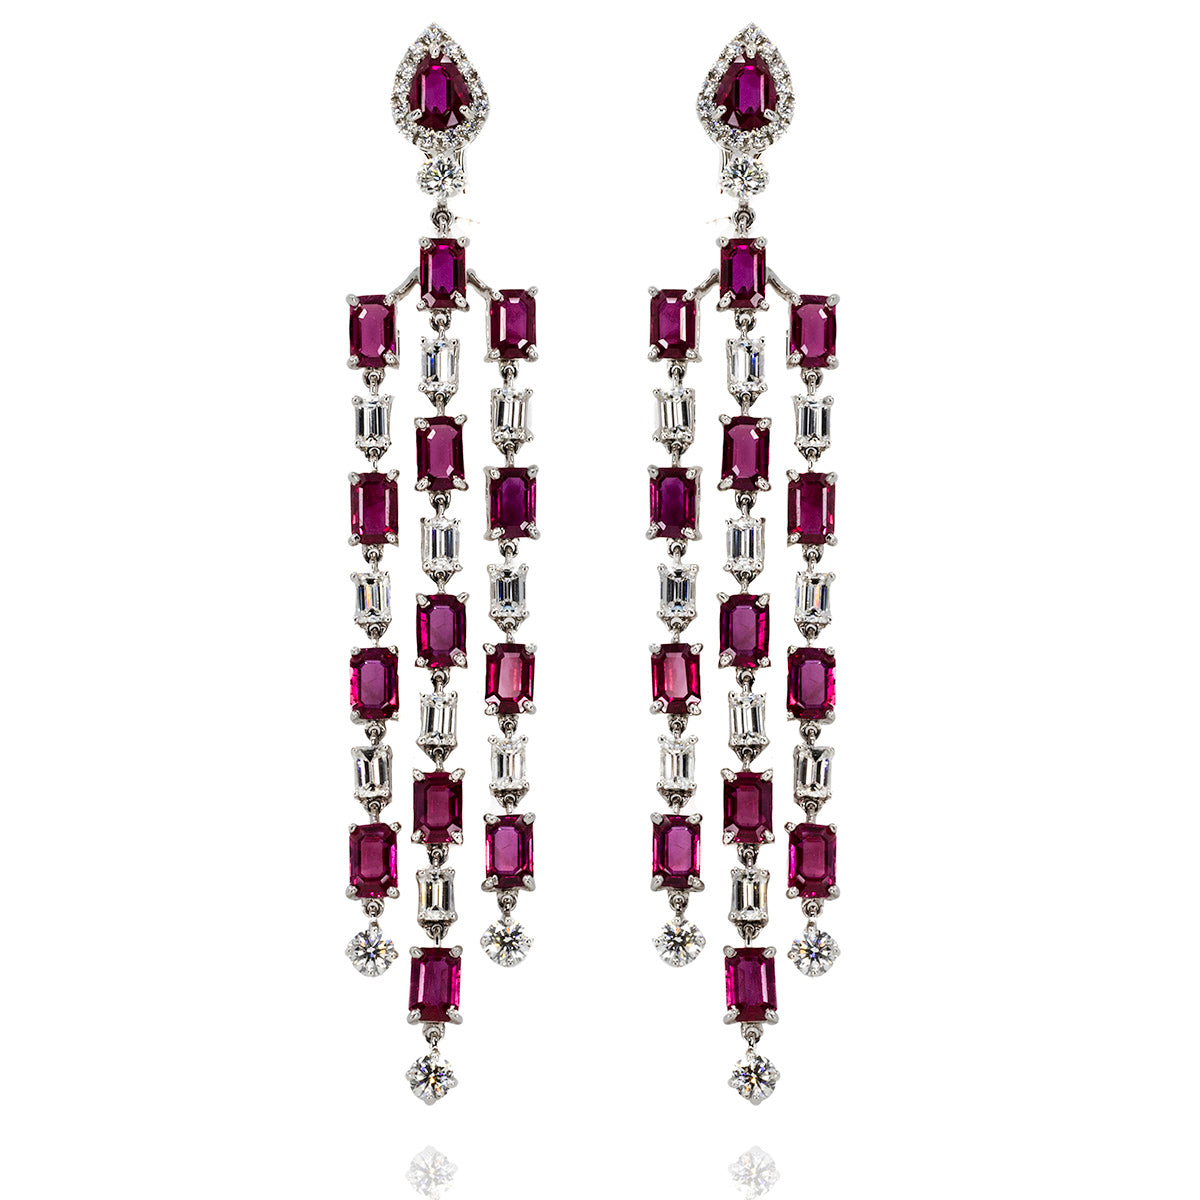 18k White gold earrings with 28 rubies weighing 17.16 carats...